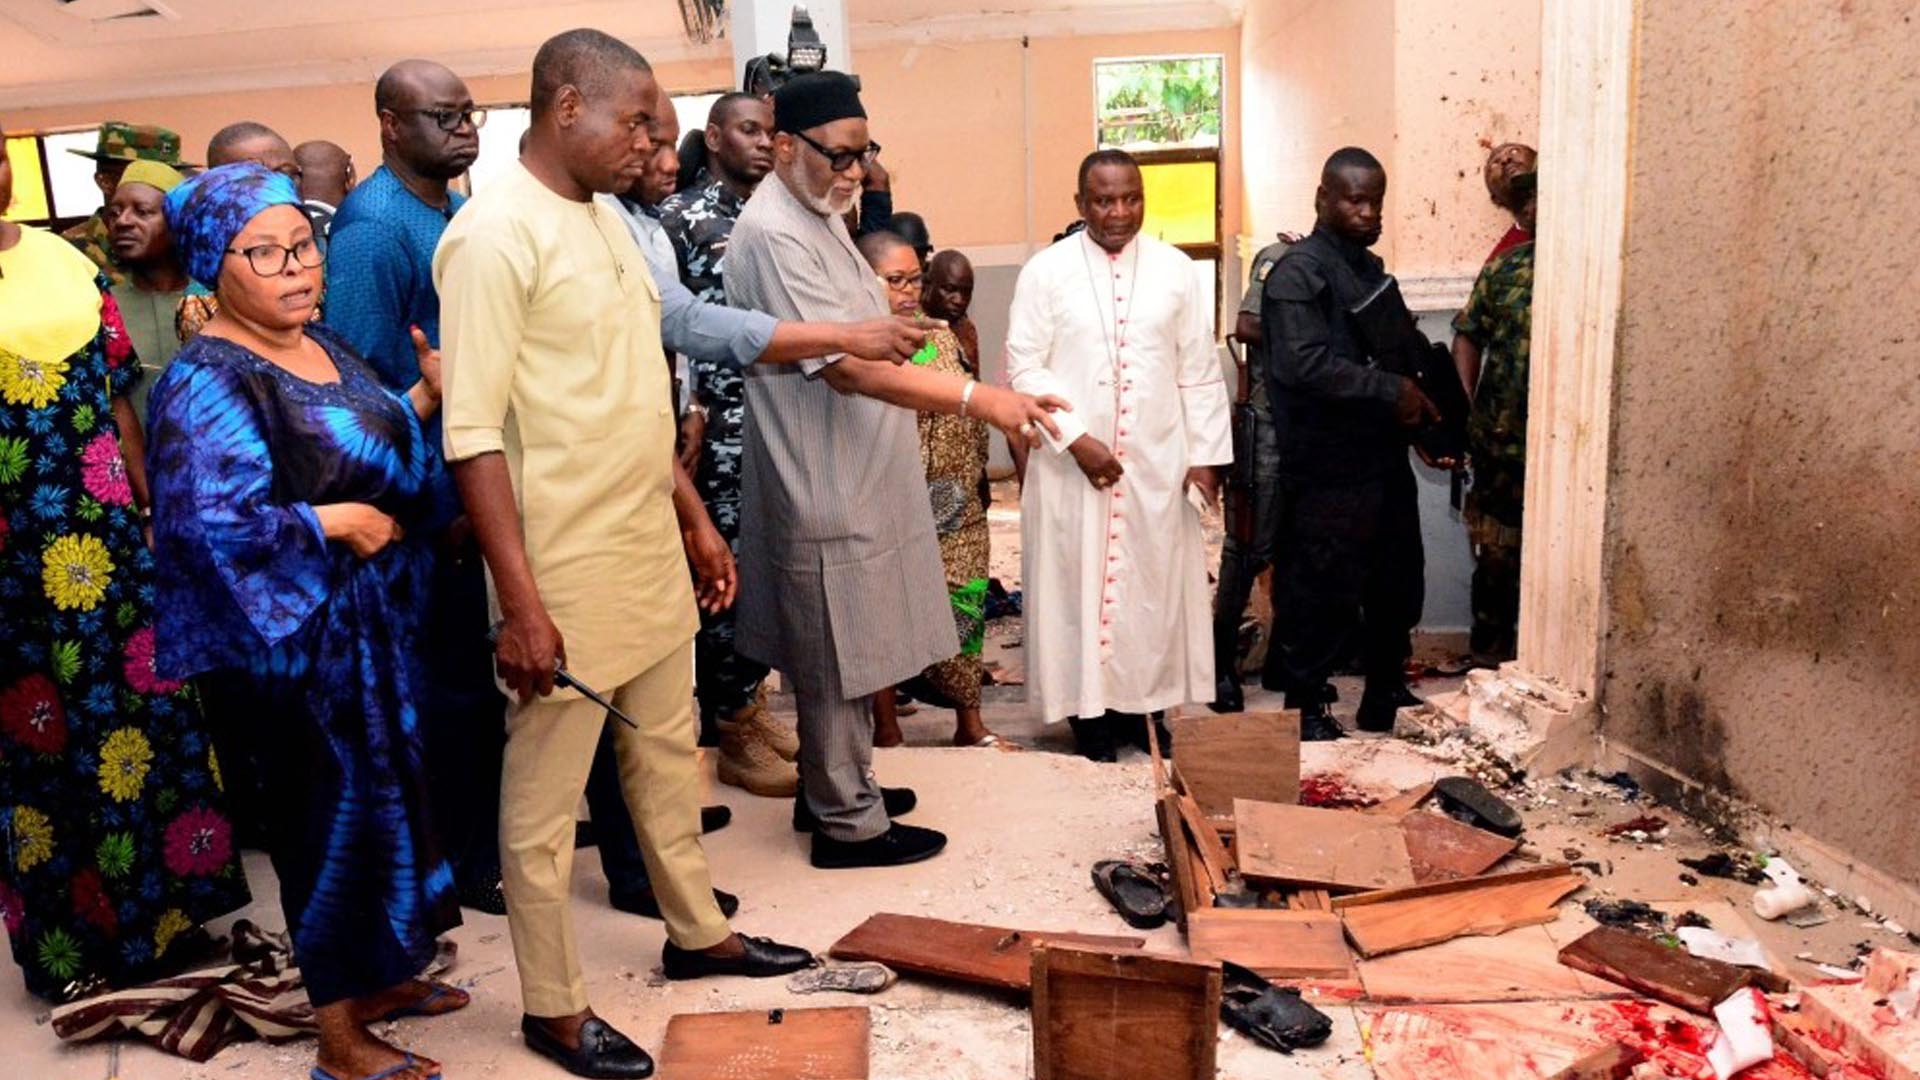 More than 50 people were killed as militants attacked a Nigerian church